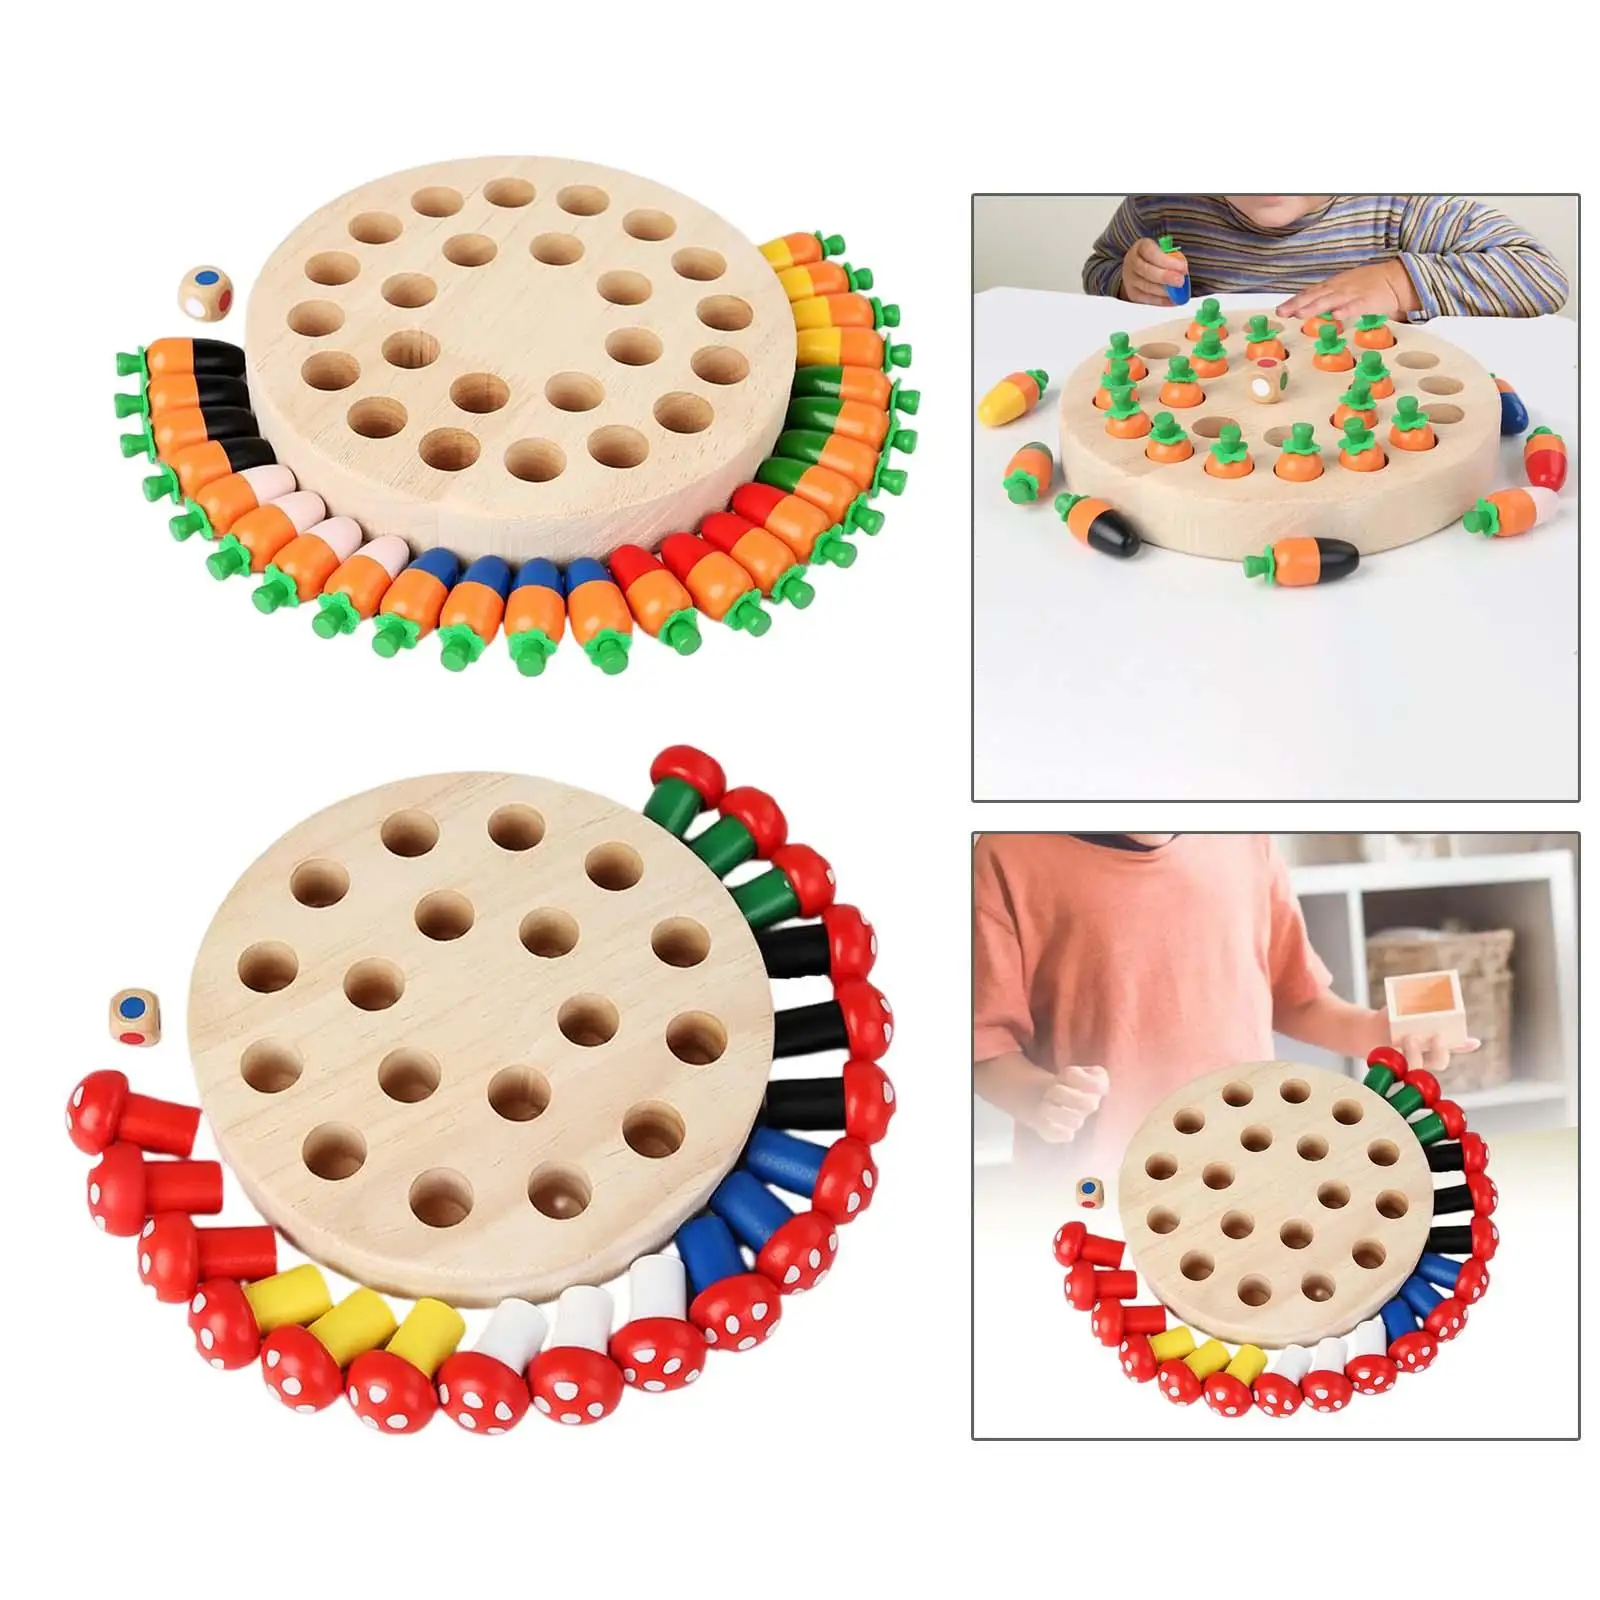 24 Board Game Color Cognitive Ability Toy Educational Montessori Color Memory for Interaction Indoor Activity Leisure Party